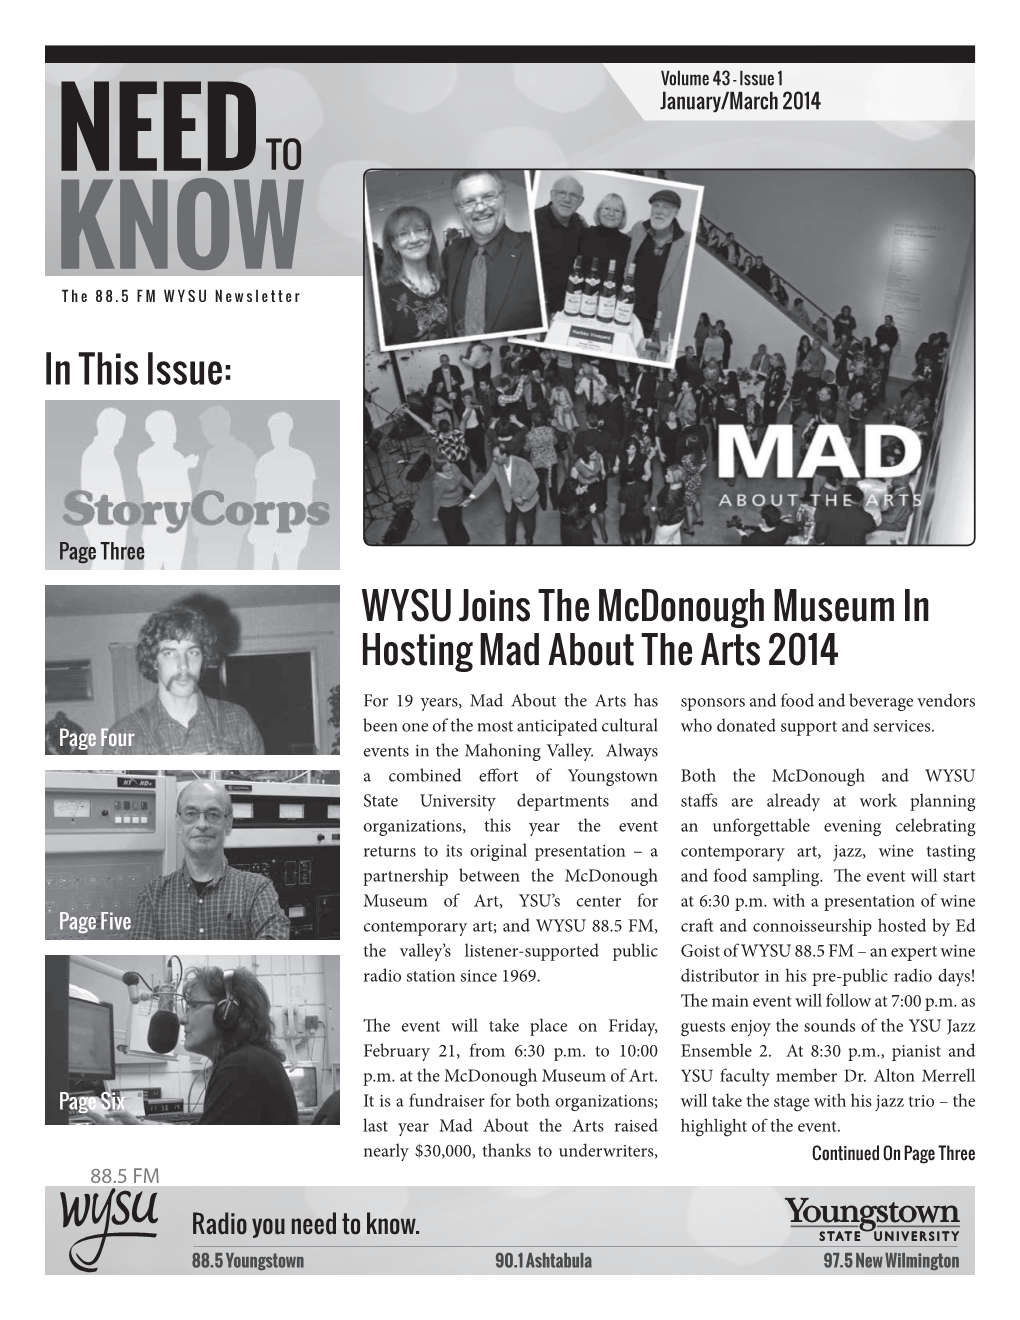 WYSU Joins the Mcdonough Museum in Hosting Mad About the Arts 2014